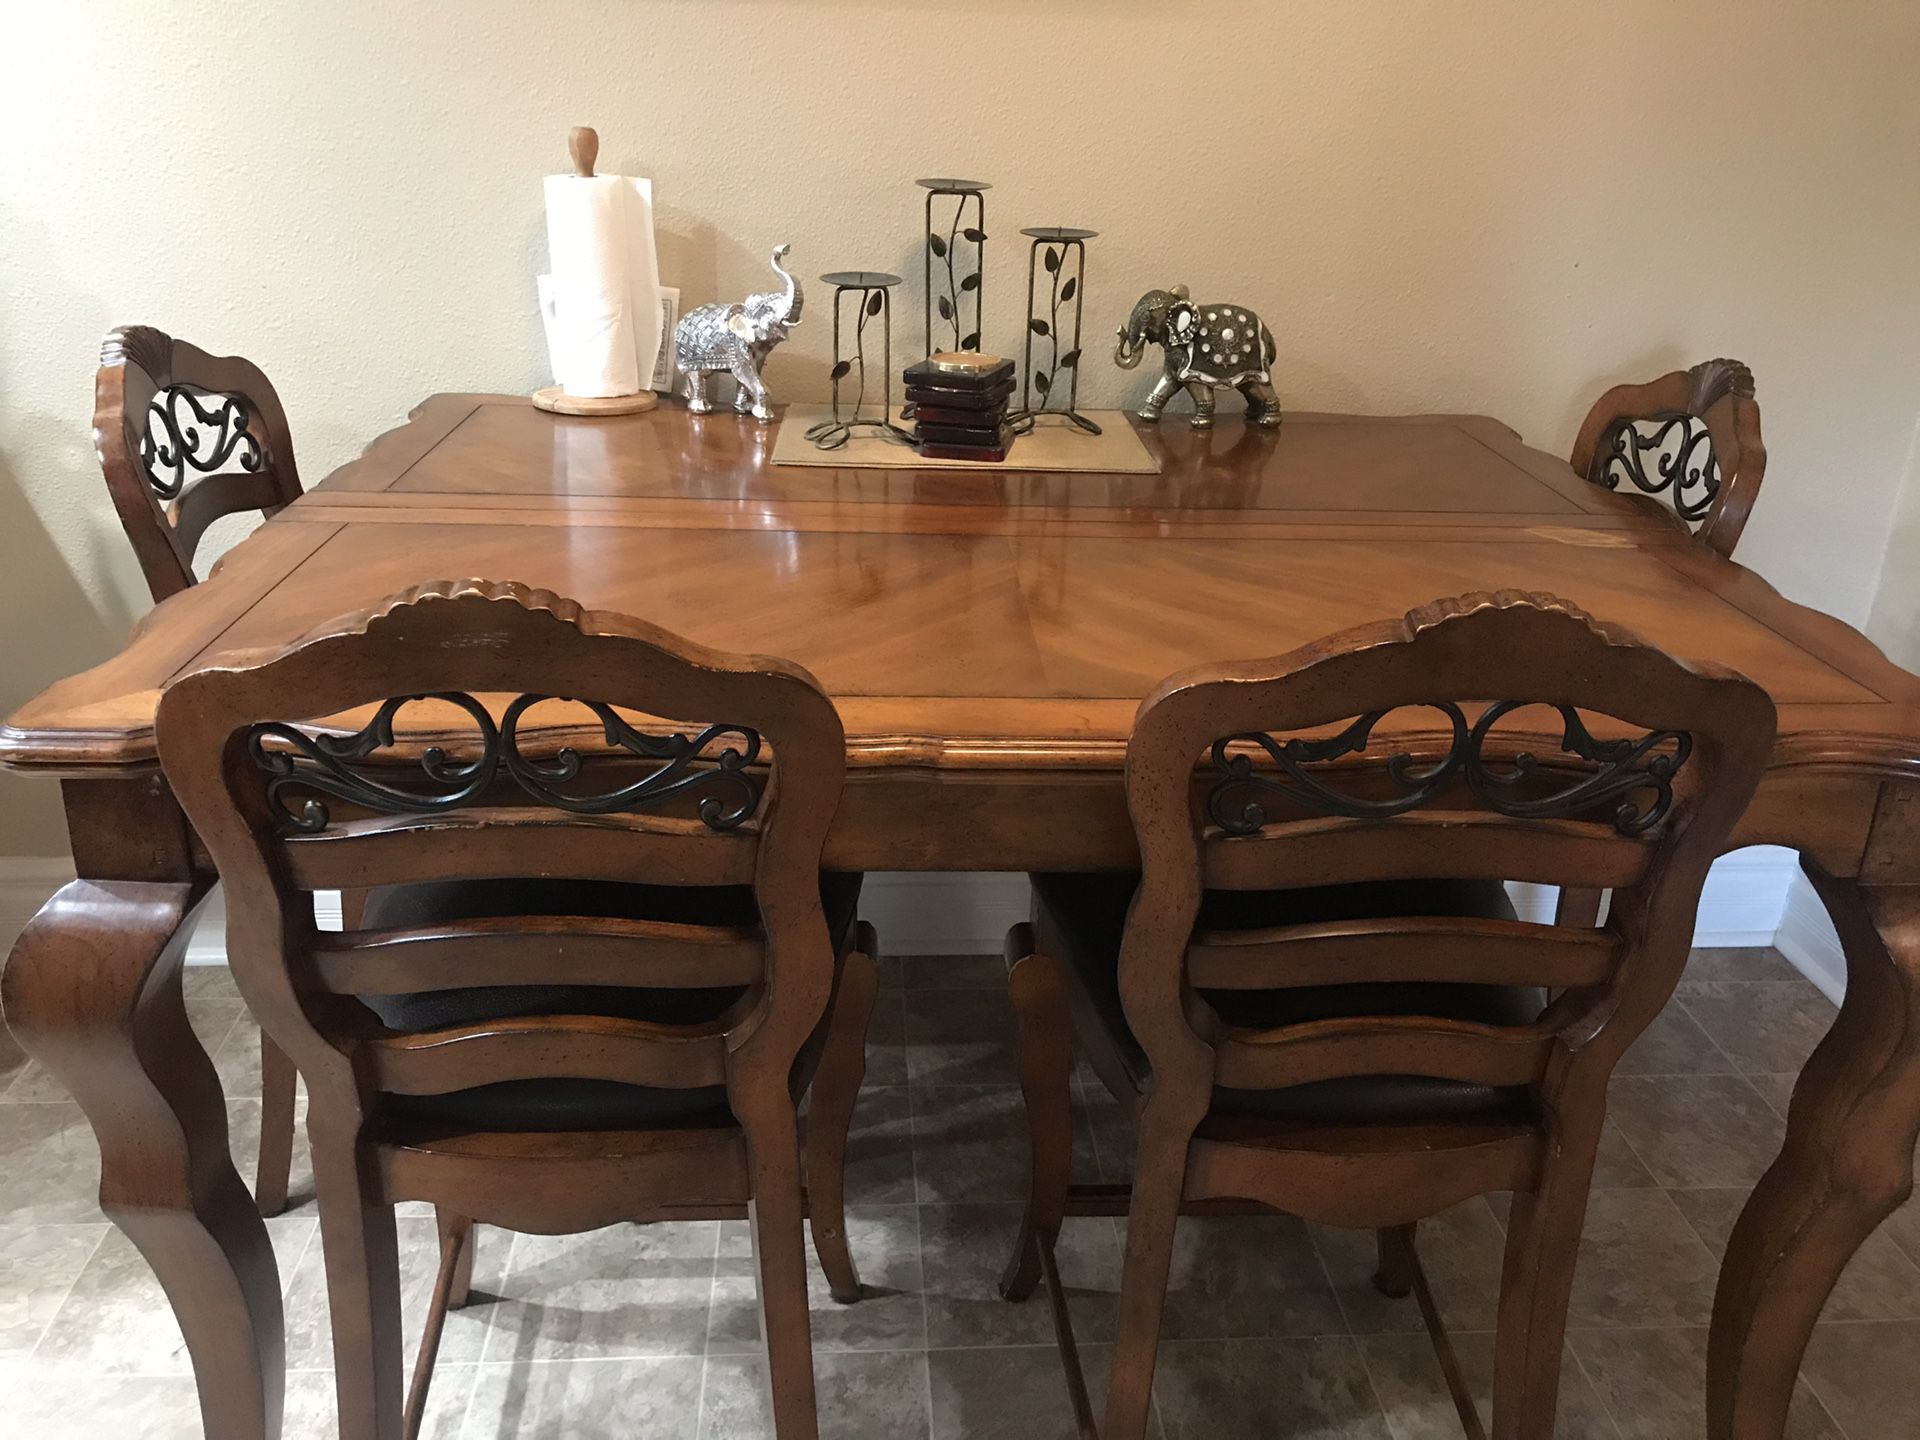 Wooden table with 4 chairs